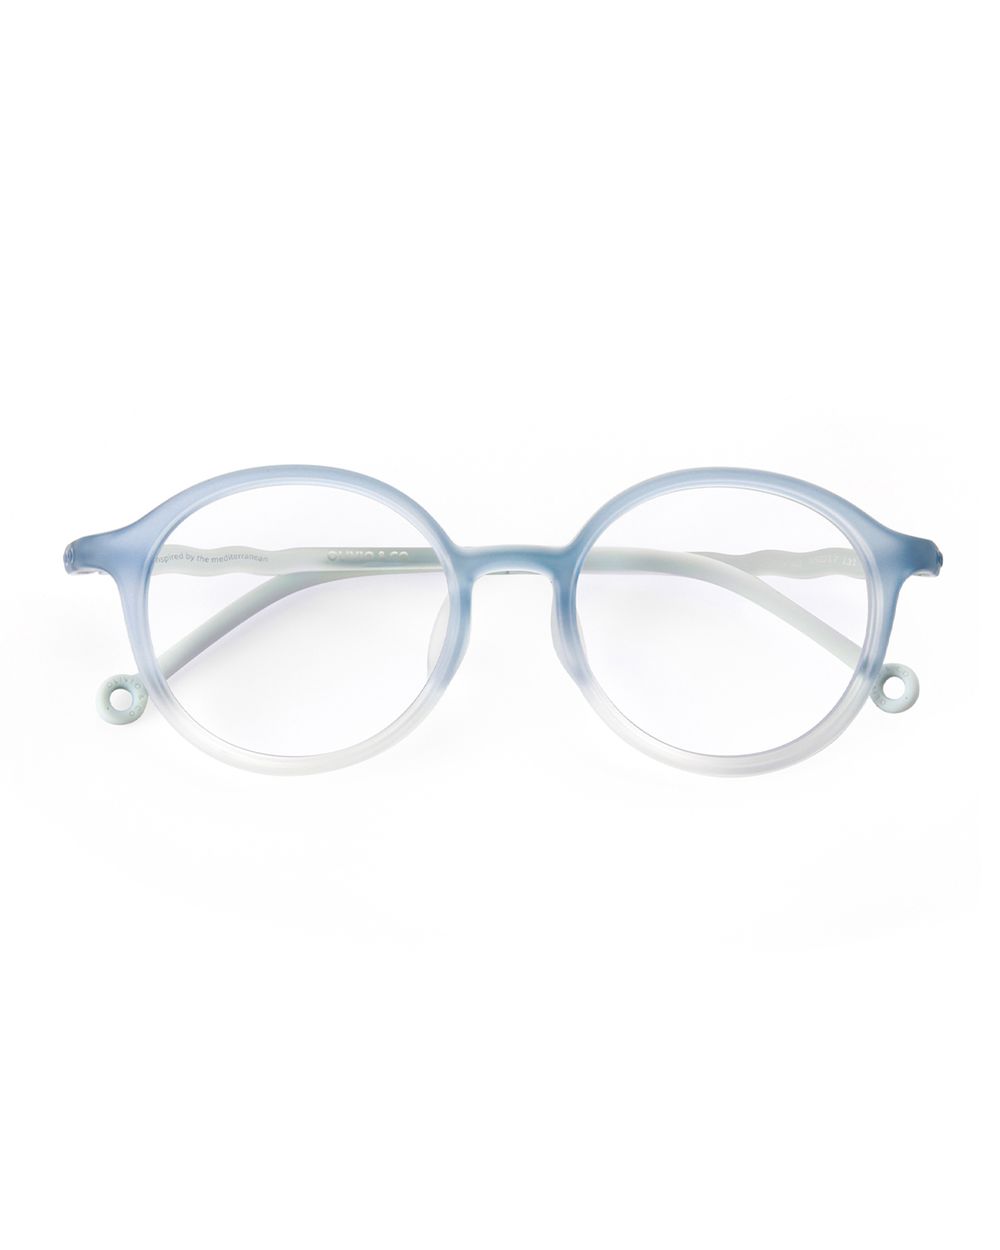 Kids Oval Screen Glasses Tranquil Blue